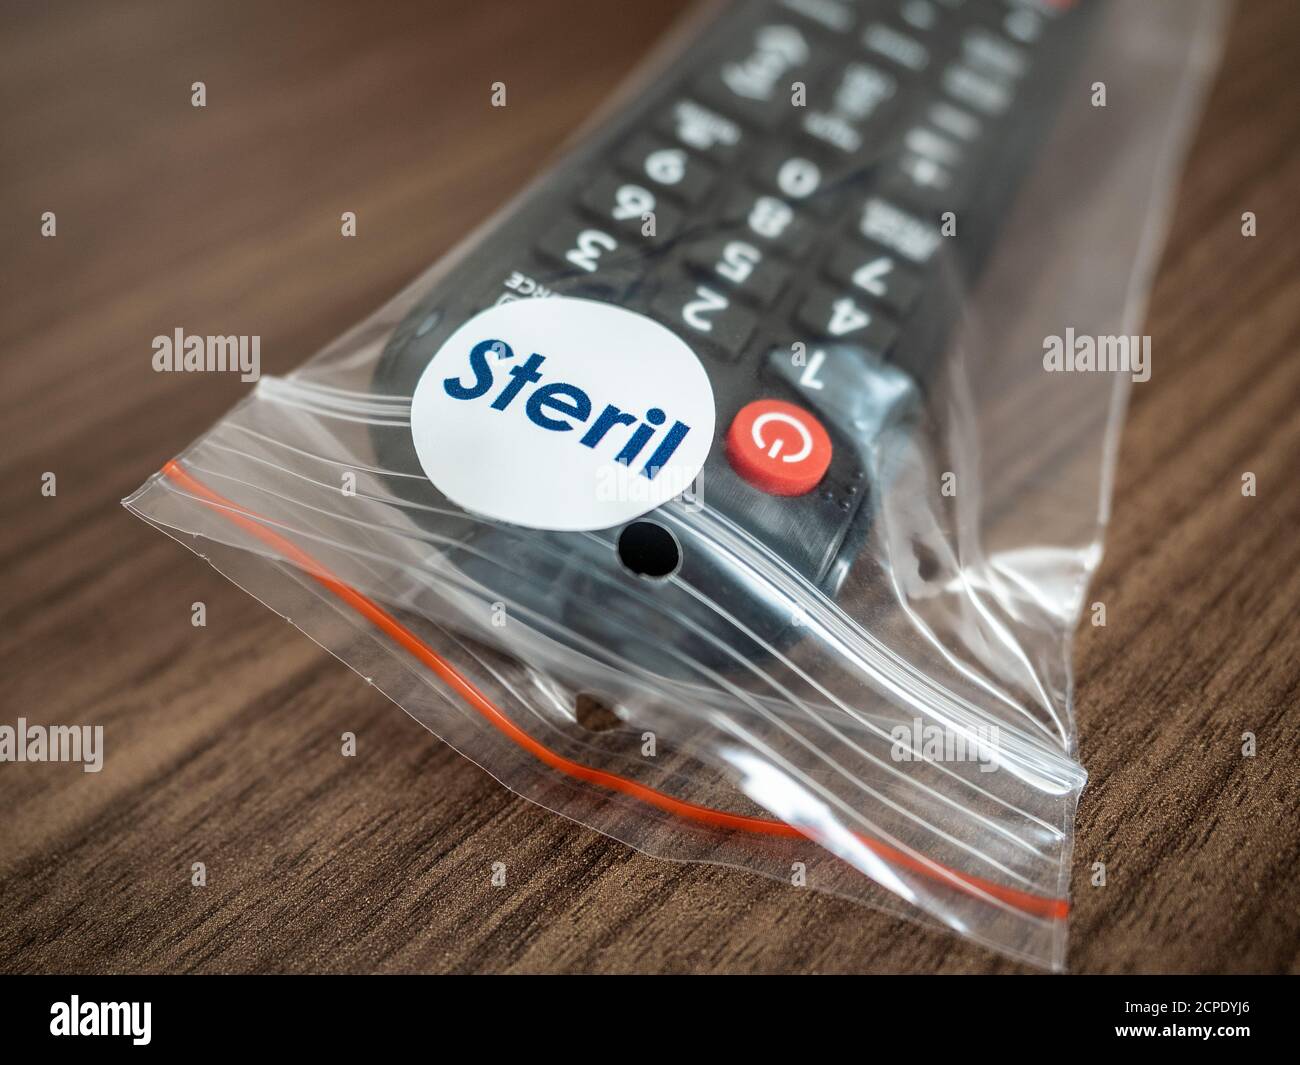 TV remote control in steril bag ready to use in hotel room. COVID-19 protection concept. Stock Photo